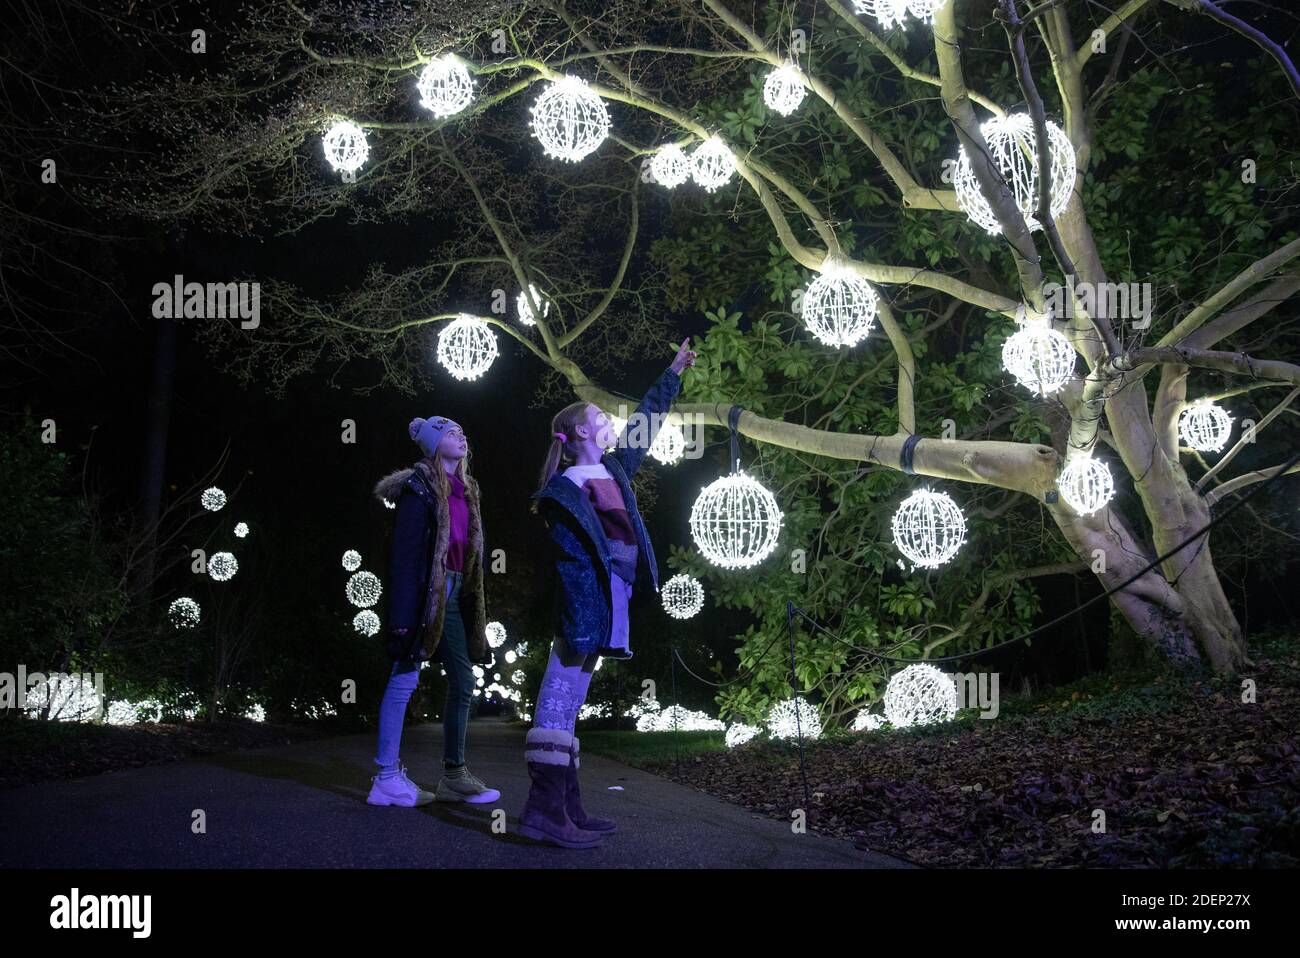 Elena Kingstone, age 11, (left) and Lulu Kingstone, age 9, look up at  lanterns hanging from